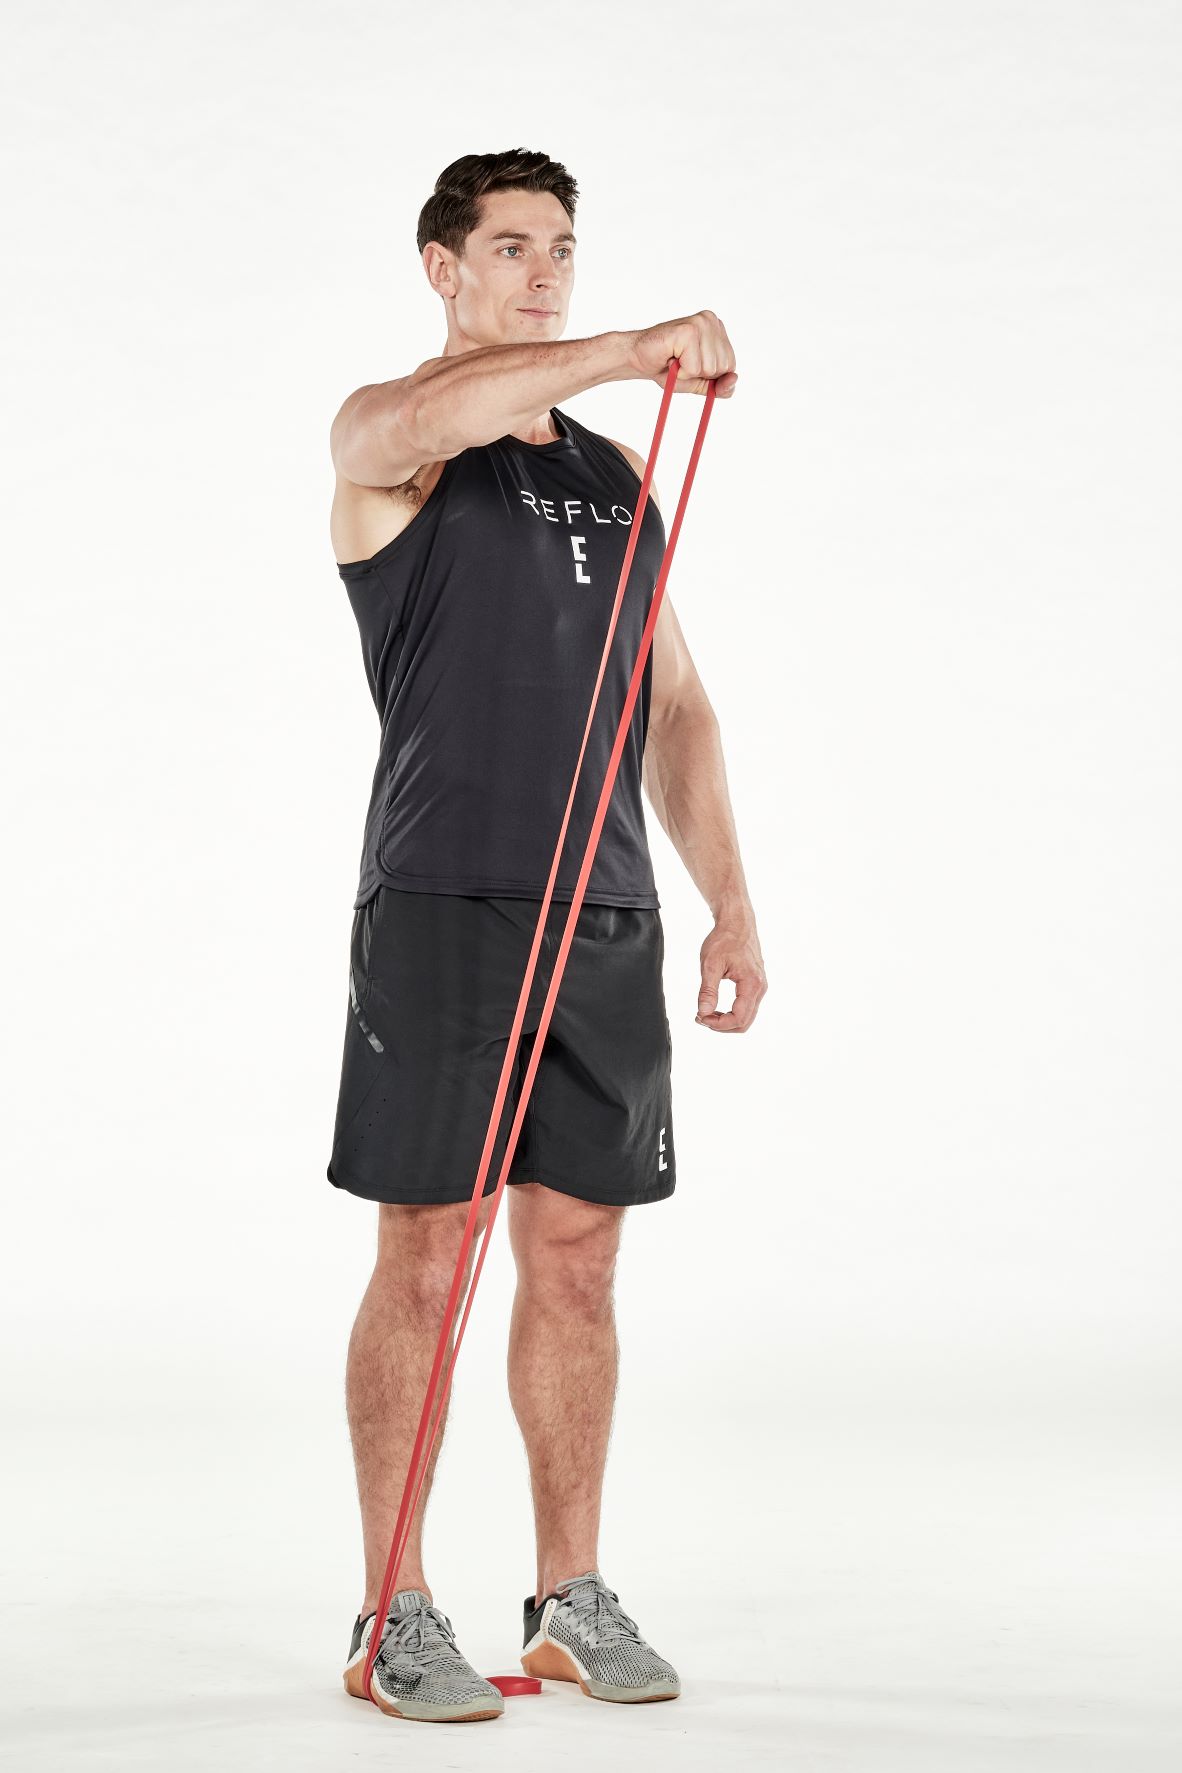 man demonstrating step two of resistance band front raise; standing up straight, he is holding a resistance band that is wrapped under one foot in one hand; keeping the arm straight, he lifts and extends his arm up until it is level with his shoulder; he wears a black fitness vest, black shorts and trainers